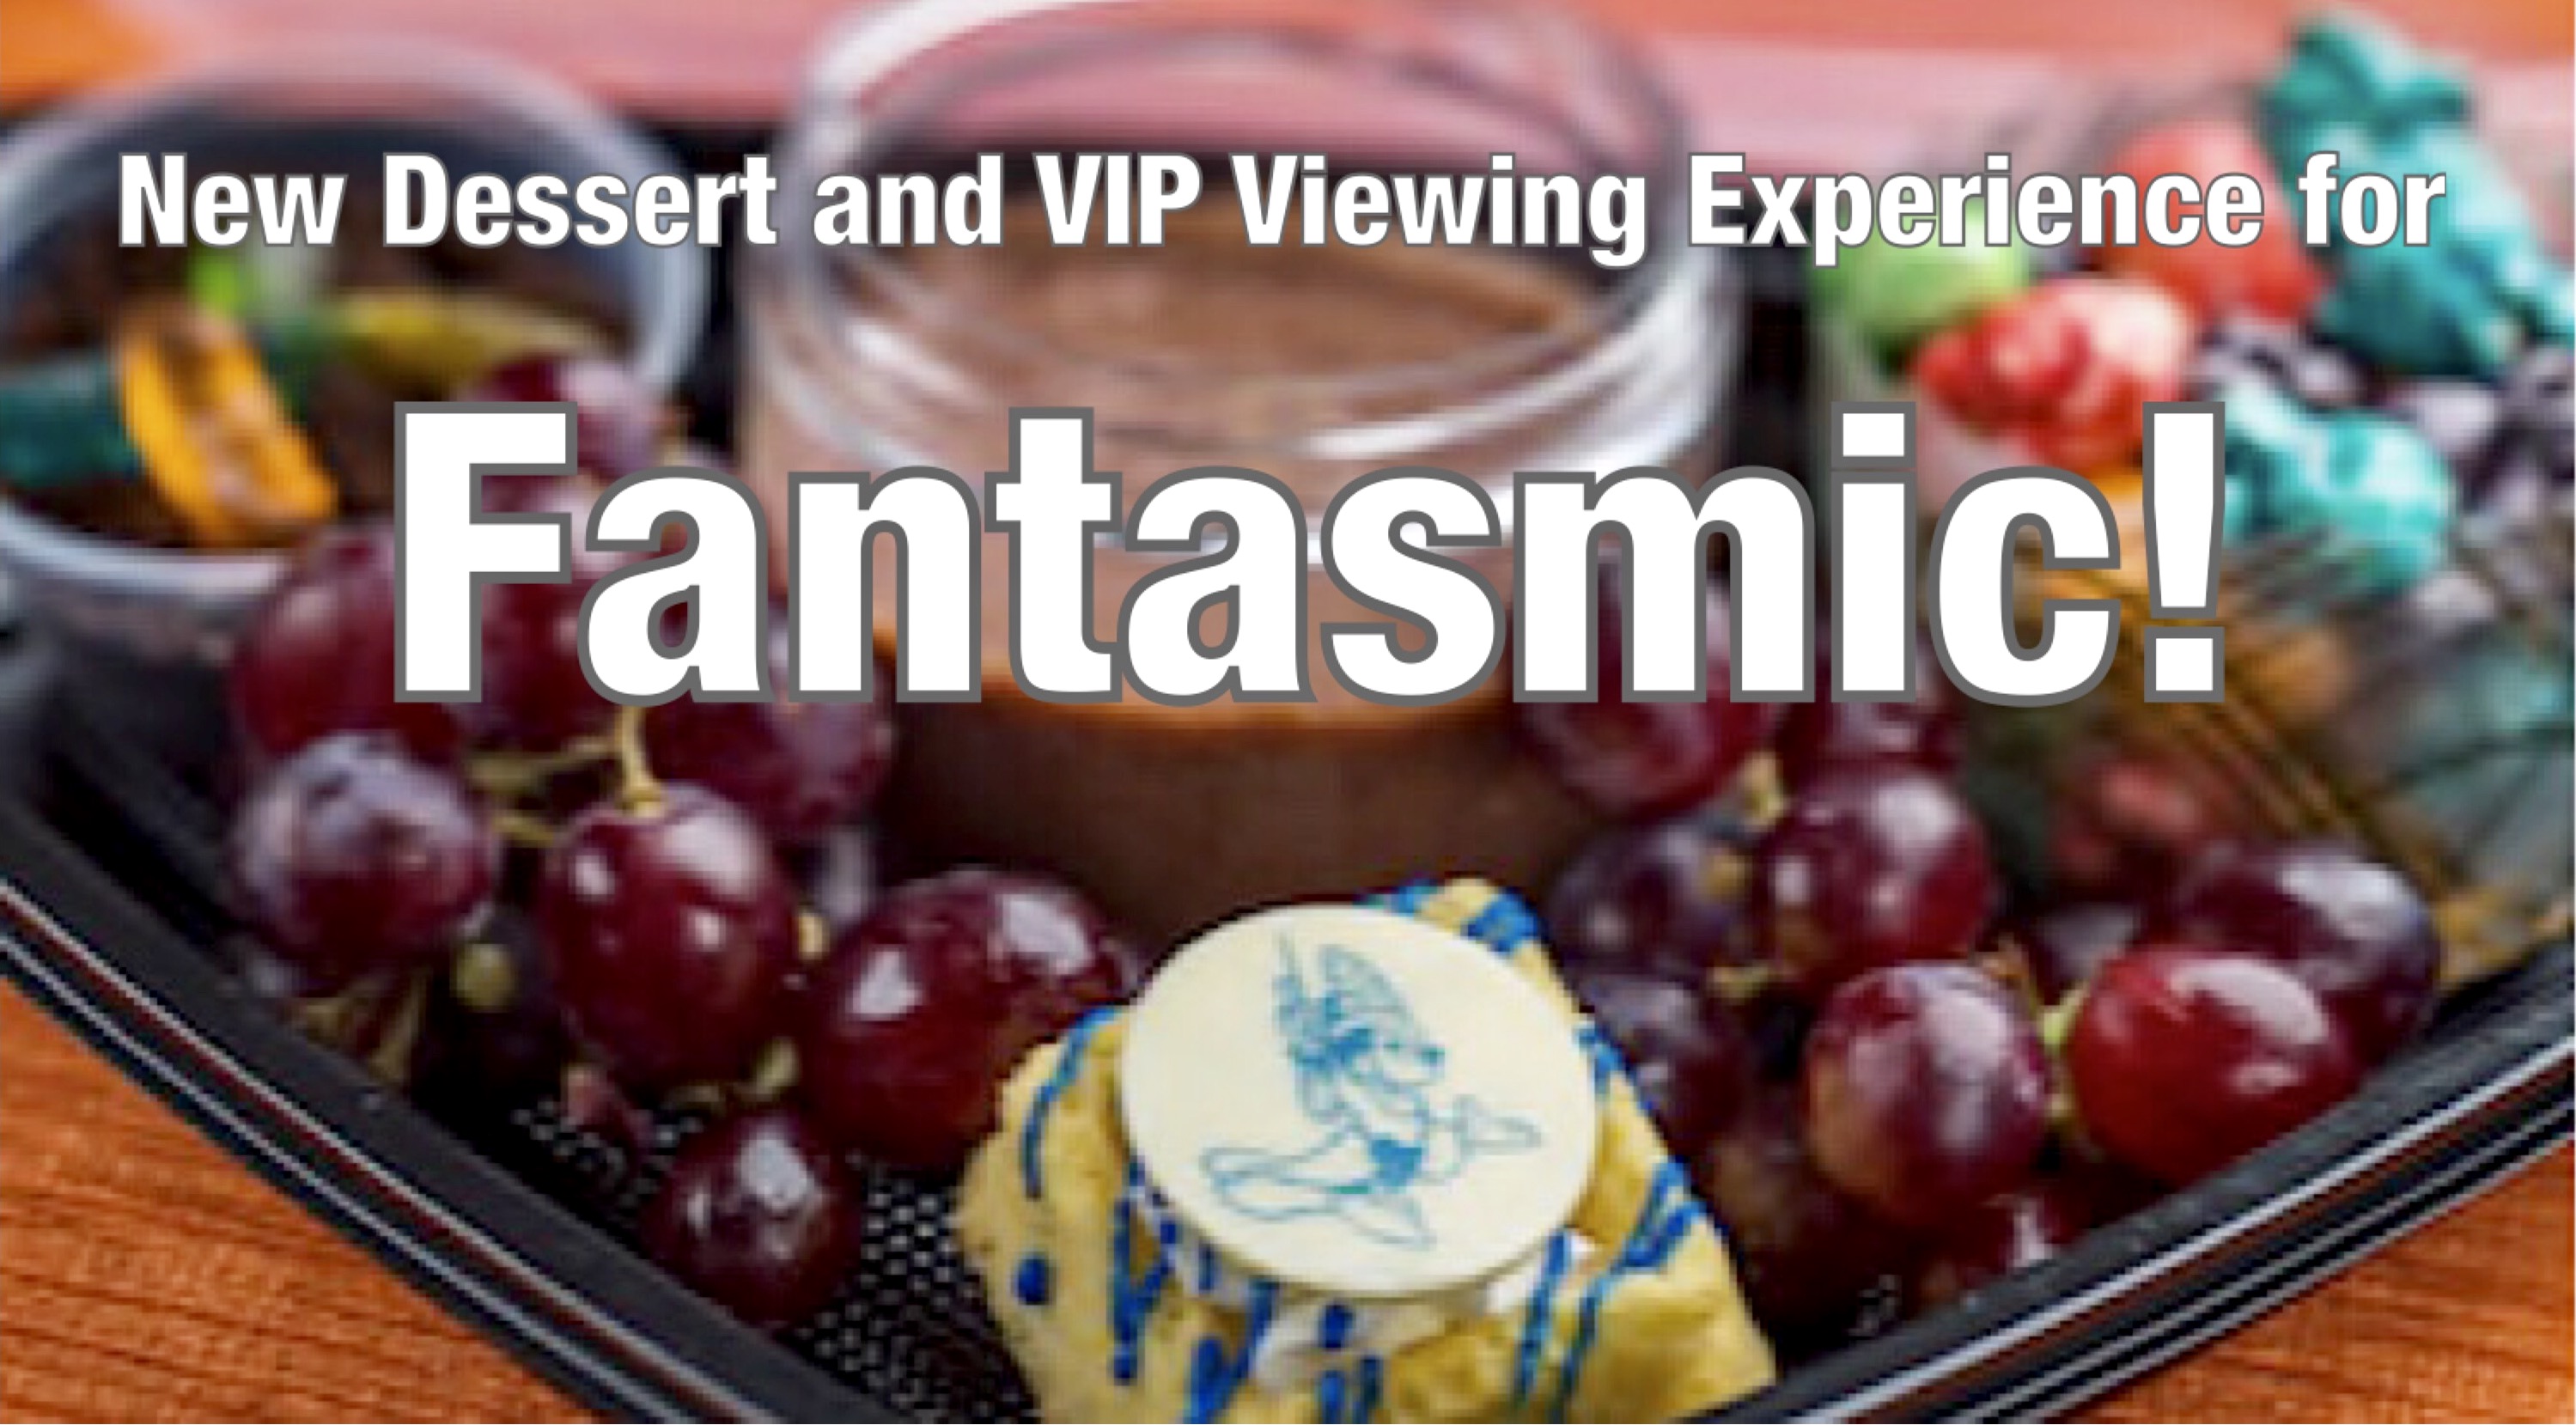 New Dessert and VIP Viewing Experience for Fantasmic!